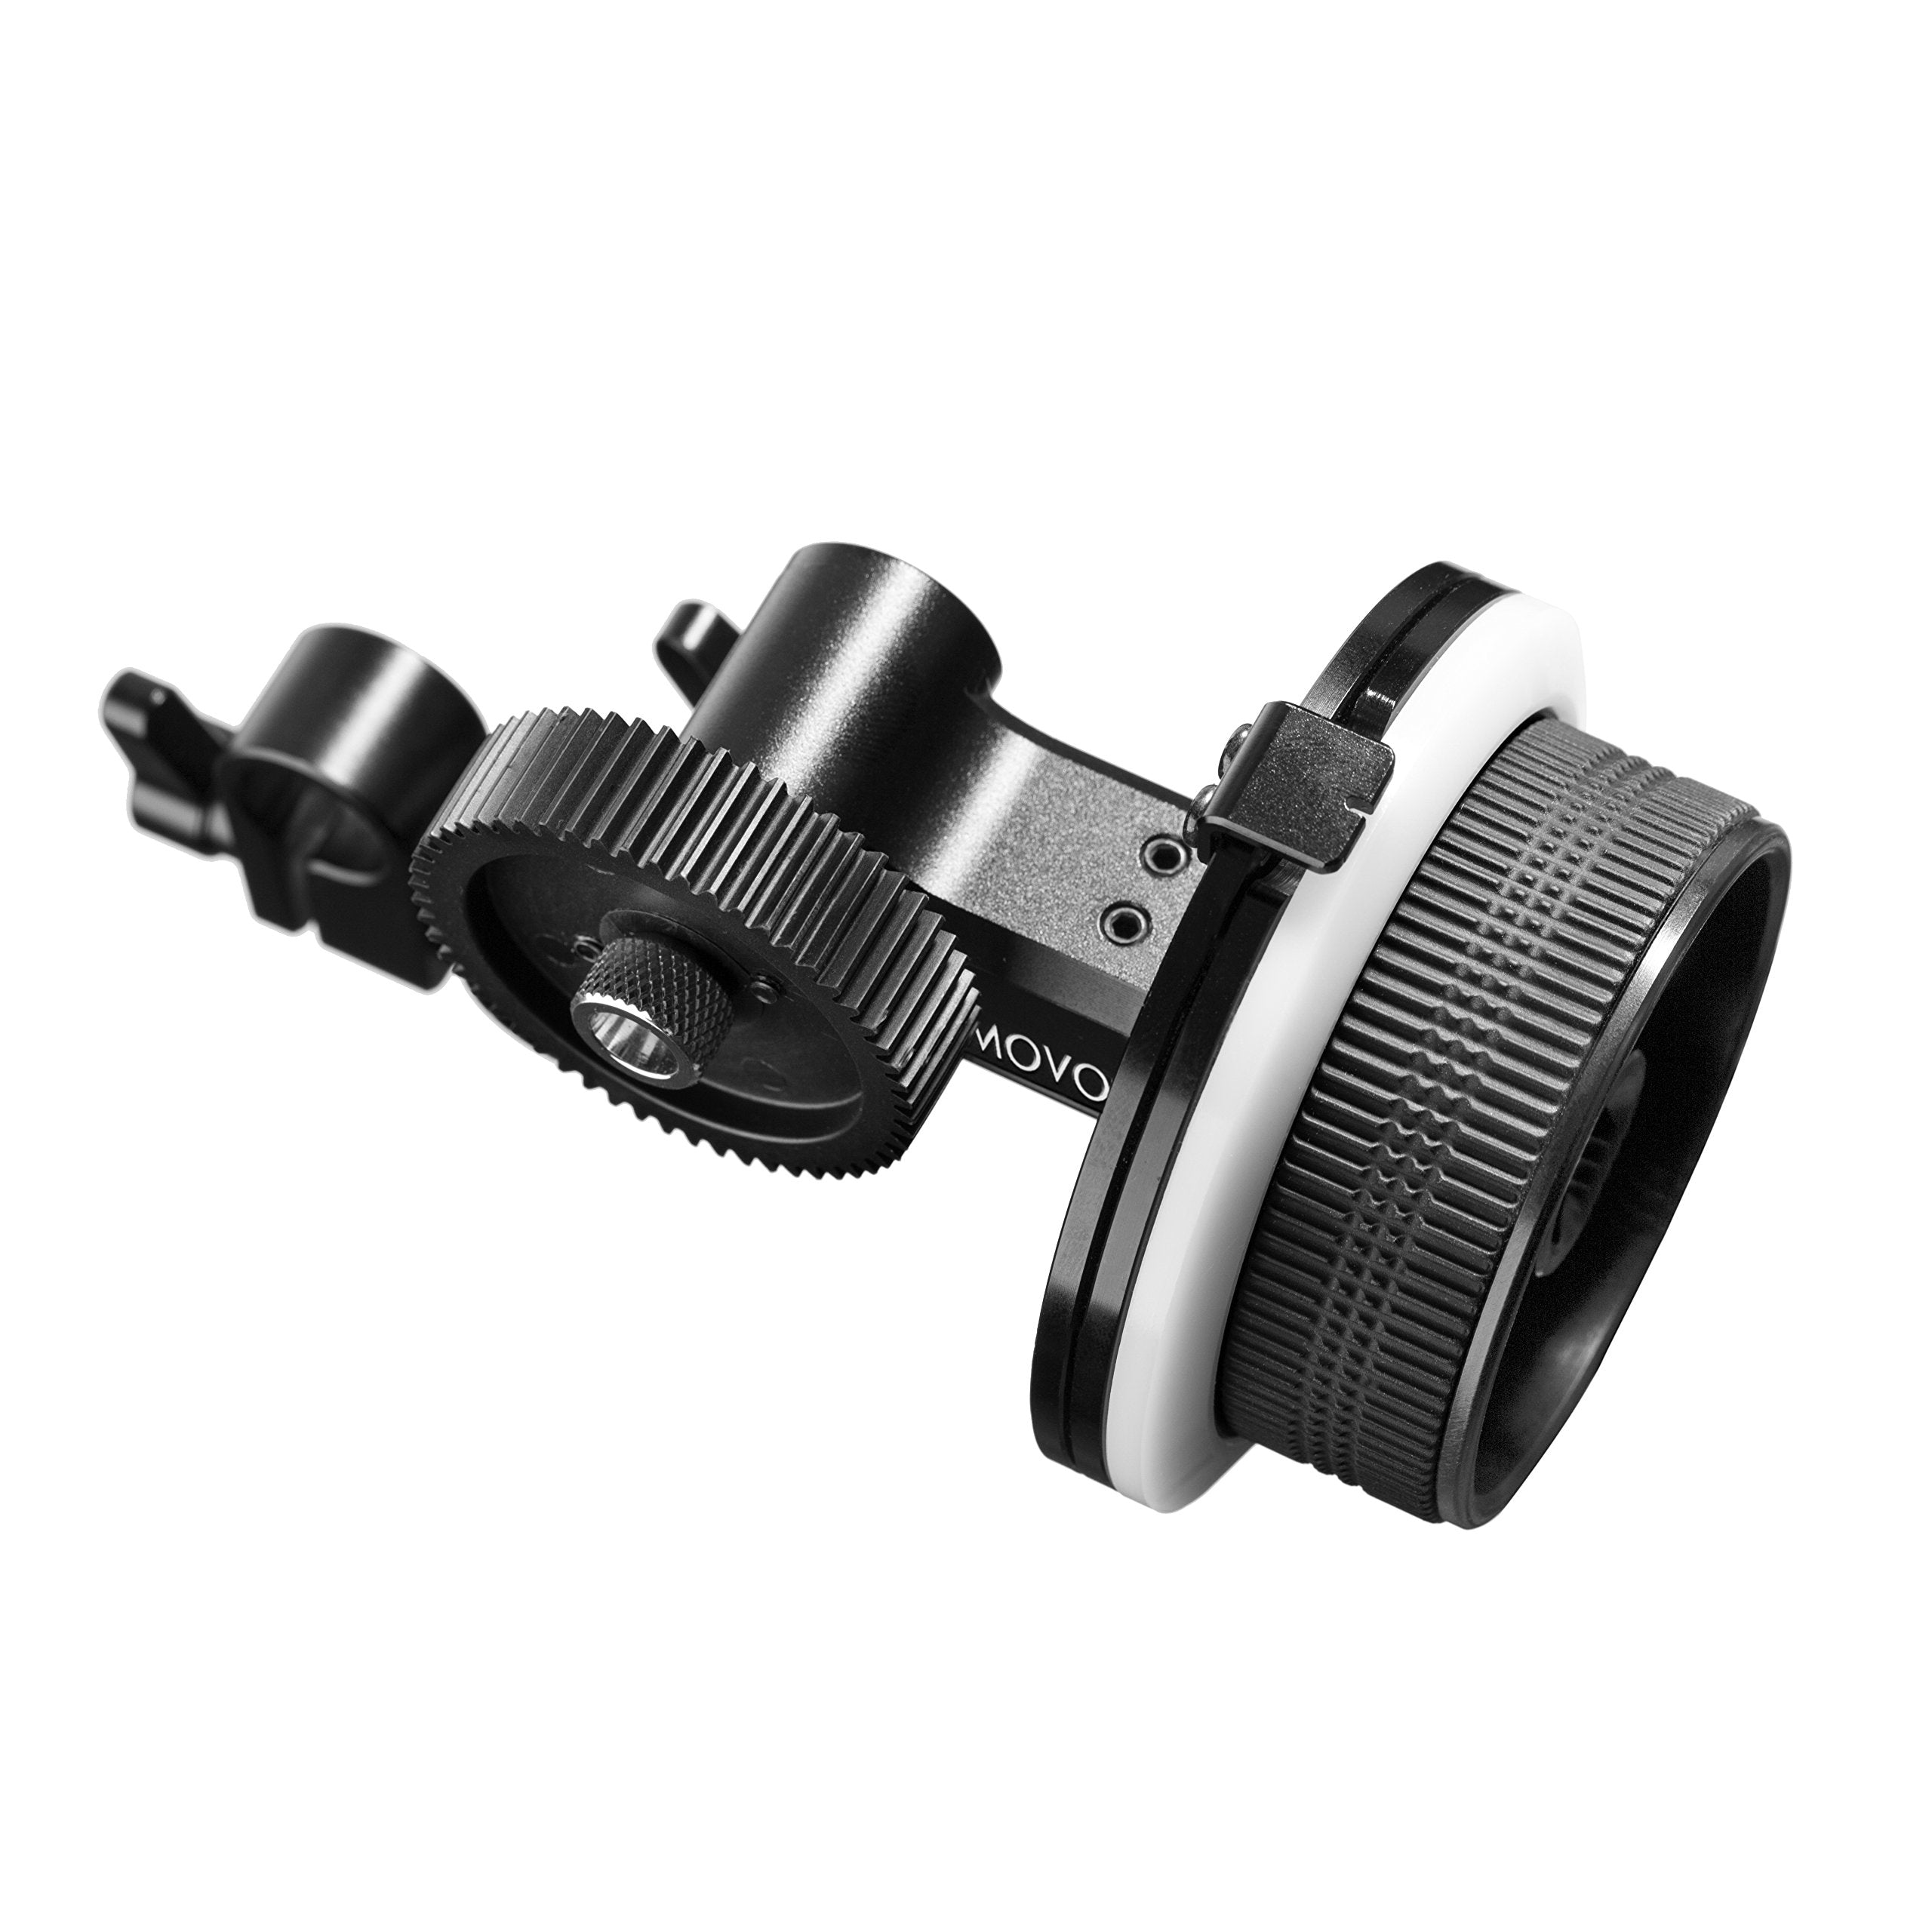 Movo F1X Precision Follow Focus System with 66mm, 77mm and 88mm Adjustable Gear Rings  - Like New